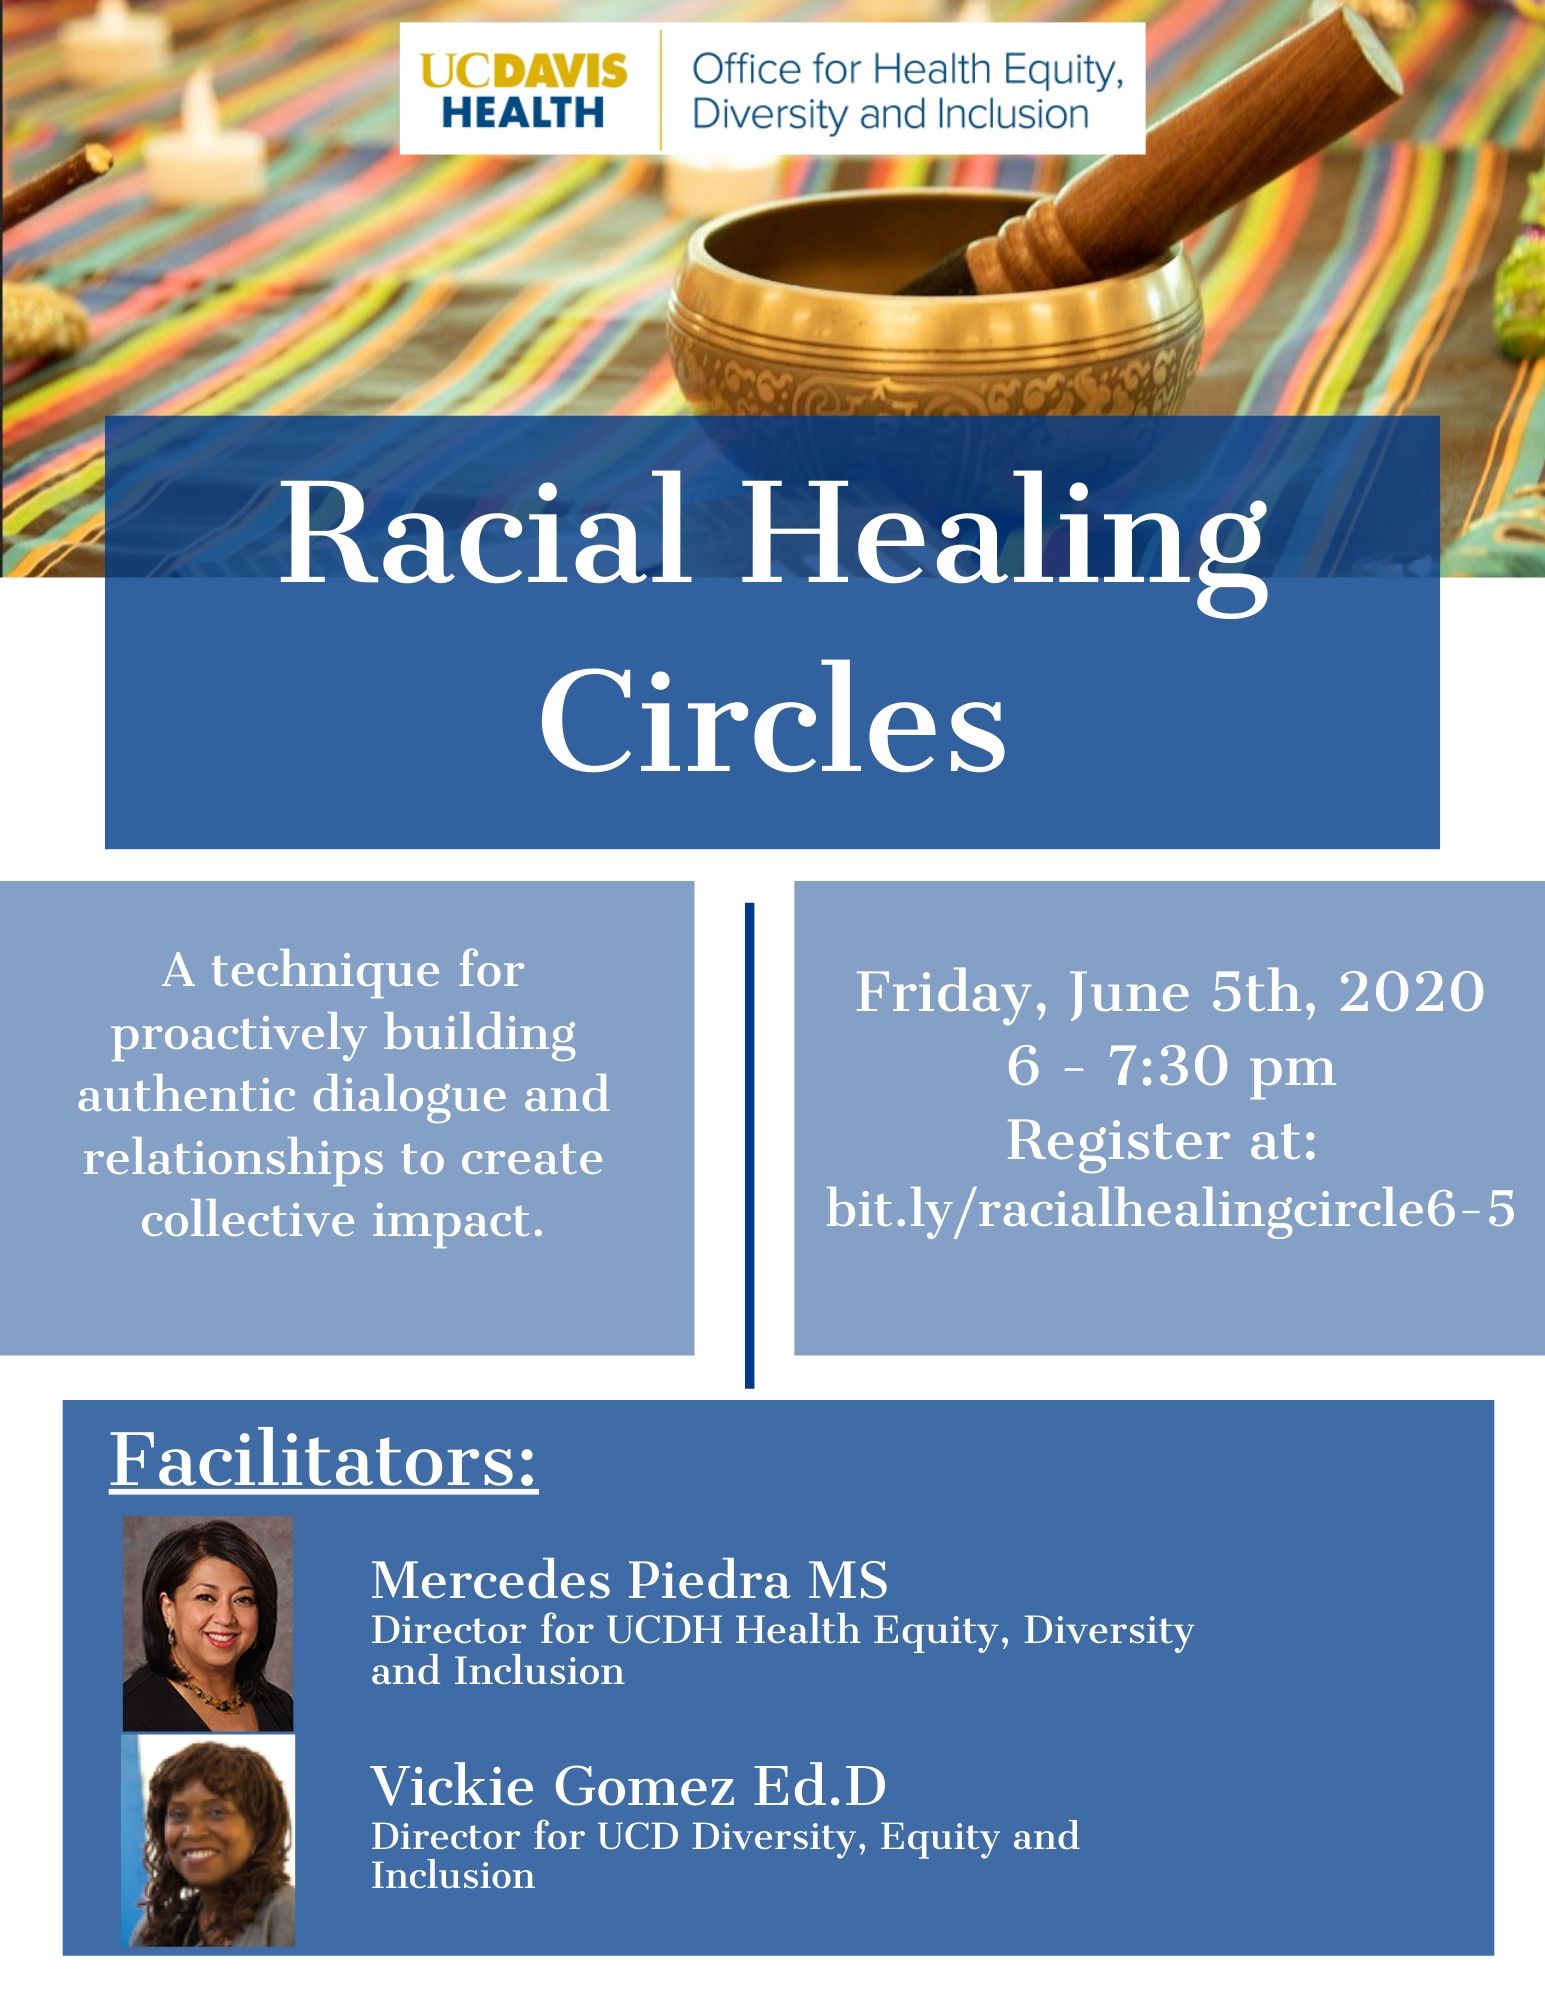 healing circle flyer, details included in text above